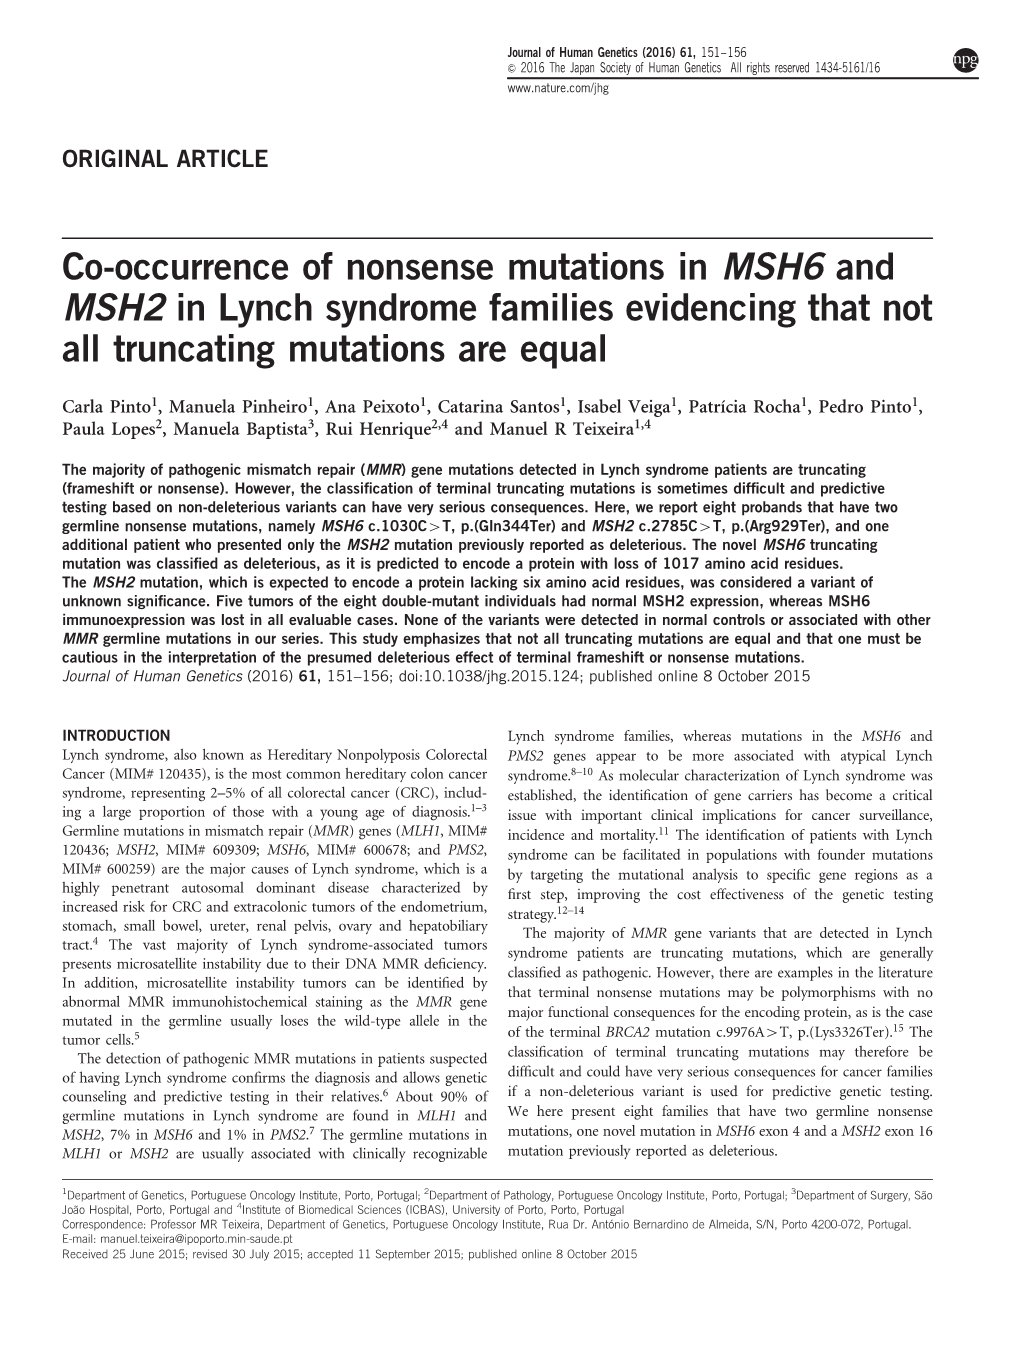 Co-Occurrence of Nonsense Mutations in MSH6 and MSH2 in Lynch Syndrome Families Evidencing That Not All Truncating Mutations Are Equal